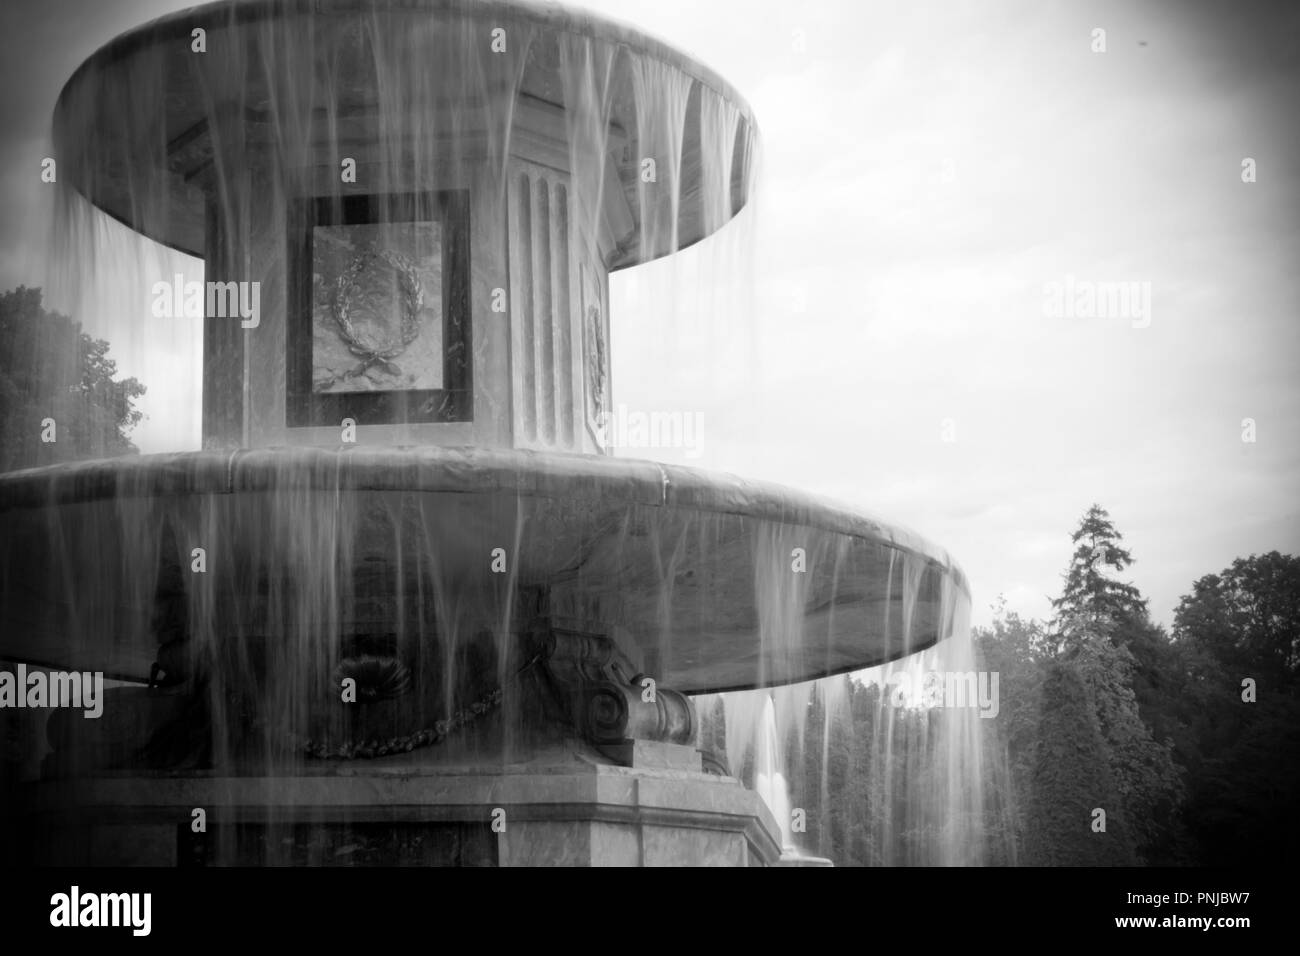 One of the two Roman fountains in Peterhof, Russia. 18th century landmark,  black and white image with darkened vignette Stock Photo